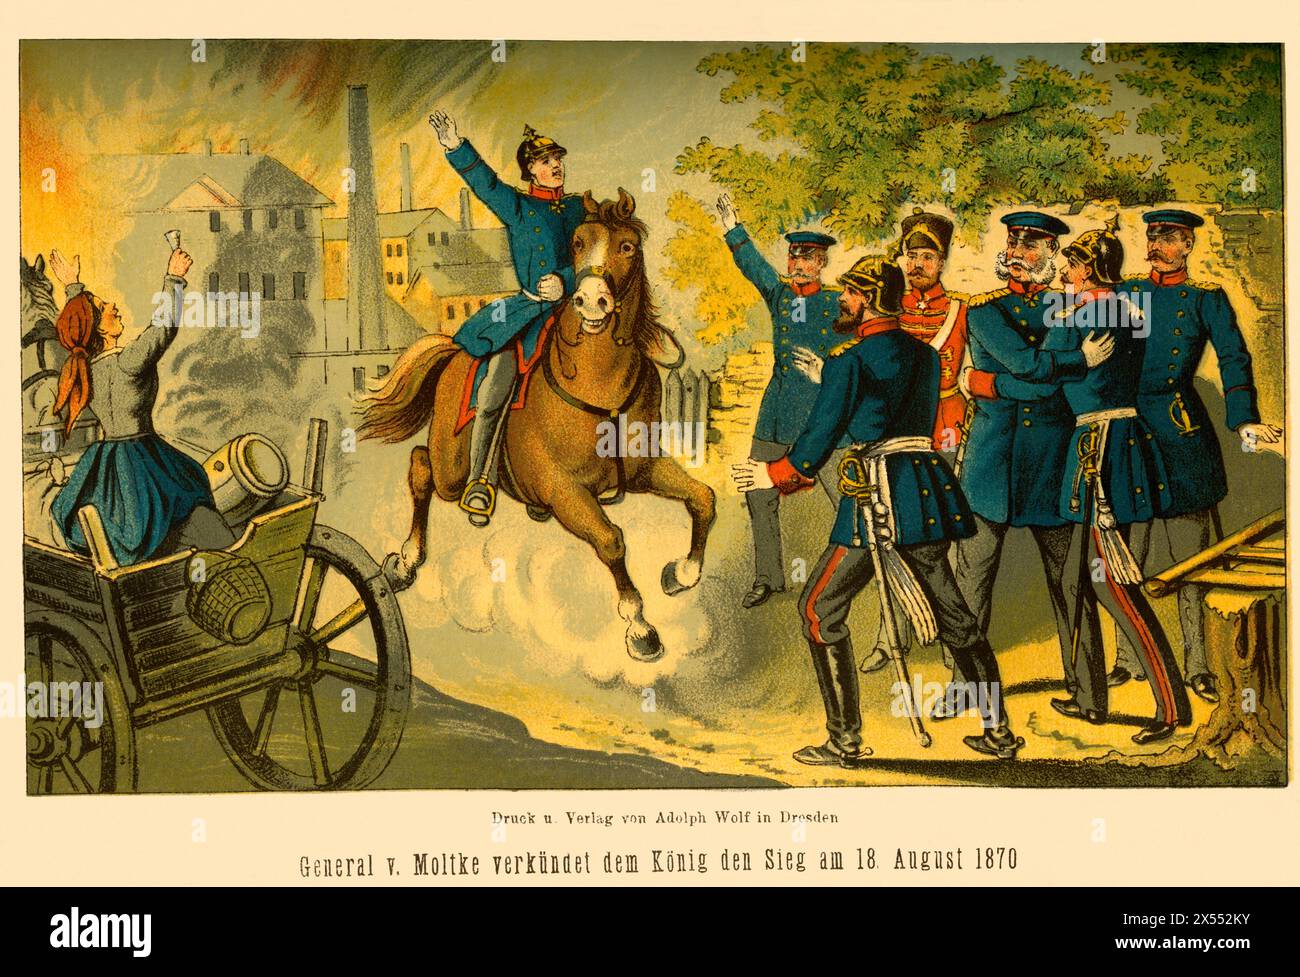 events, Franco-Prussion war, 1870-1871, ARTIST'S COPYRIGHT HAS NOT TO BE CLEARED Stock Photo